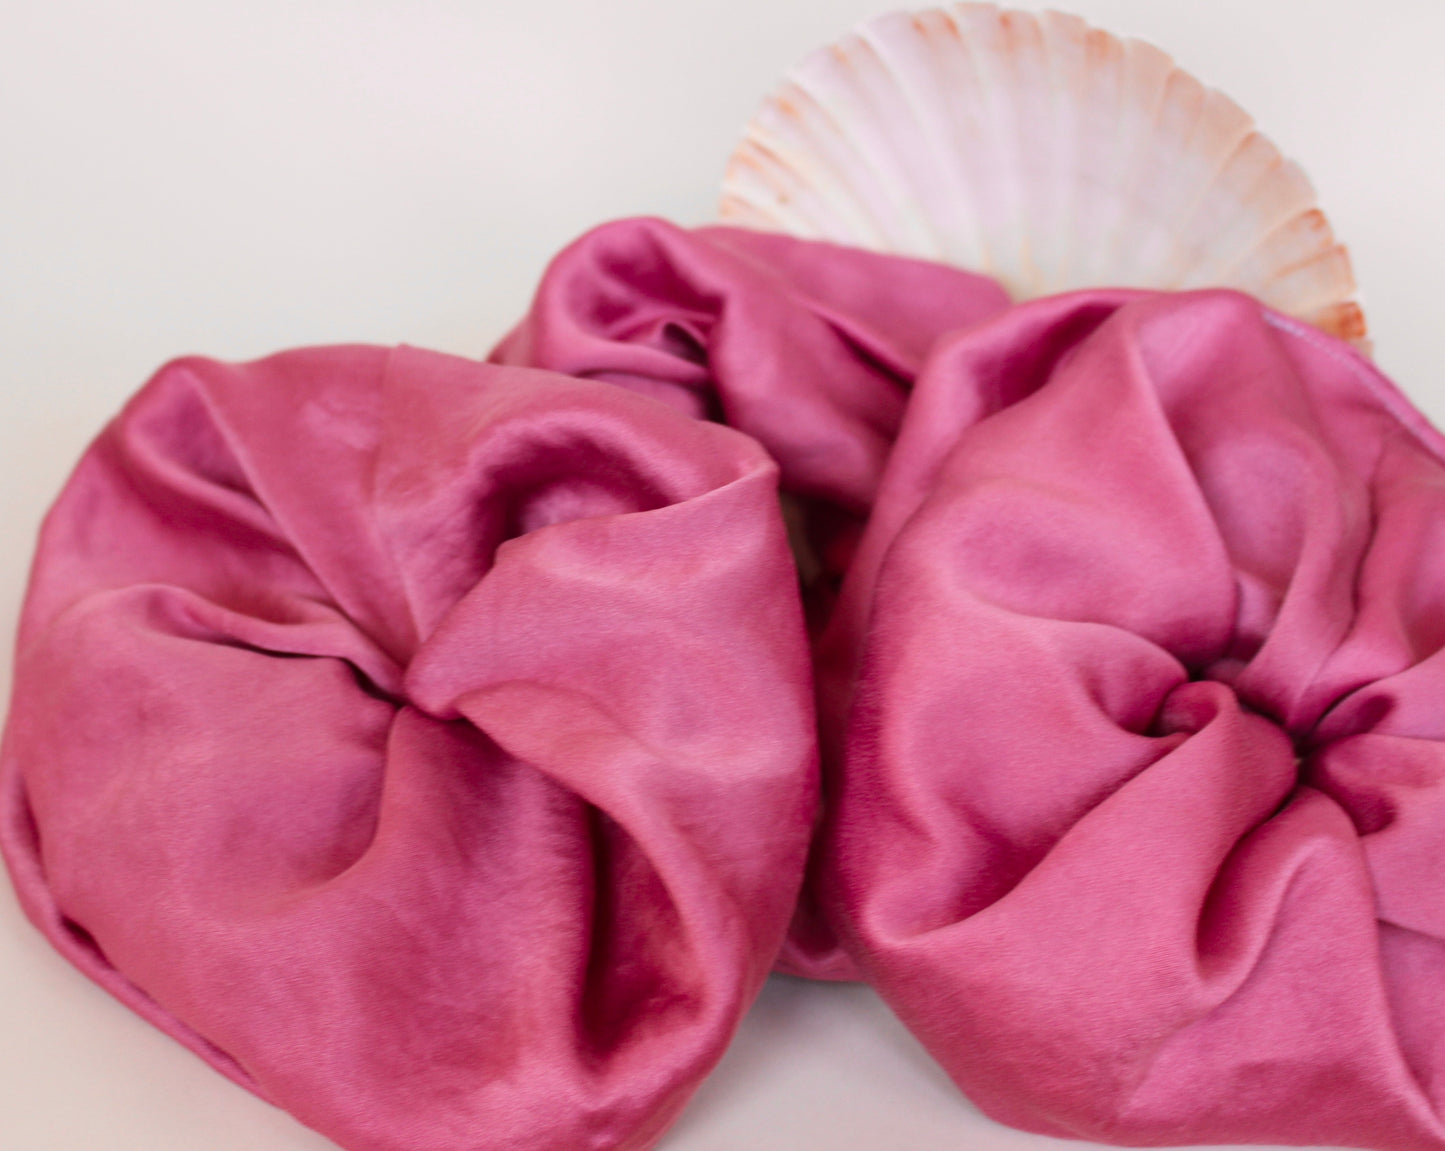 Goose Summer is a small, sustainable plant dyeing business making naturally dyed silk scrunchies and other accessories in Los Angeles. Three fuchsia colored silk scrunchies plant dyed by Goose Summer.